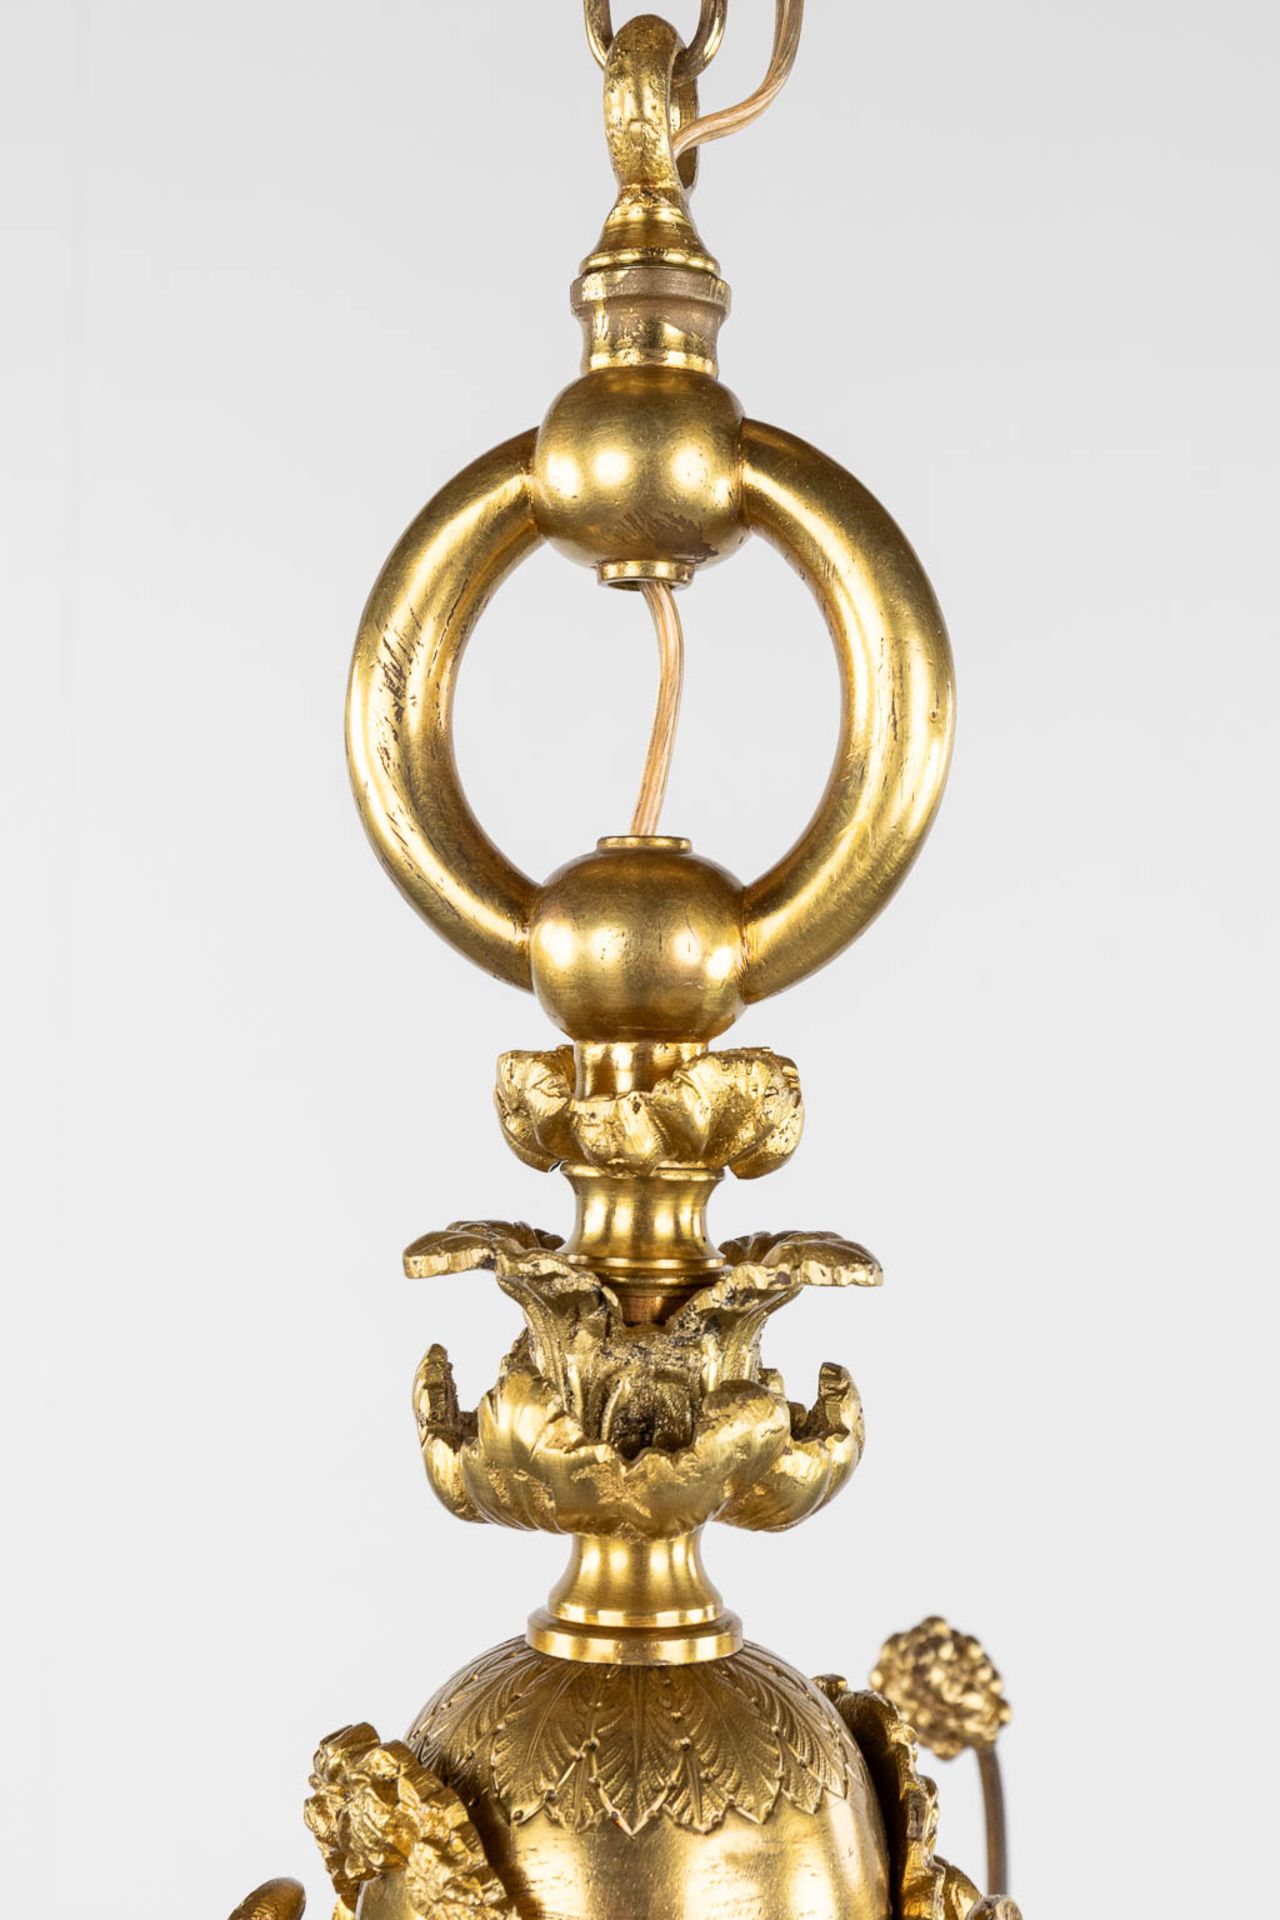 A chandelier, bronze finished with ram's heads, Louis XVI style. (H:93 x D:66 cm) - Image 5 of 13